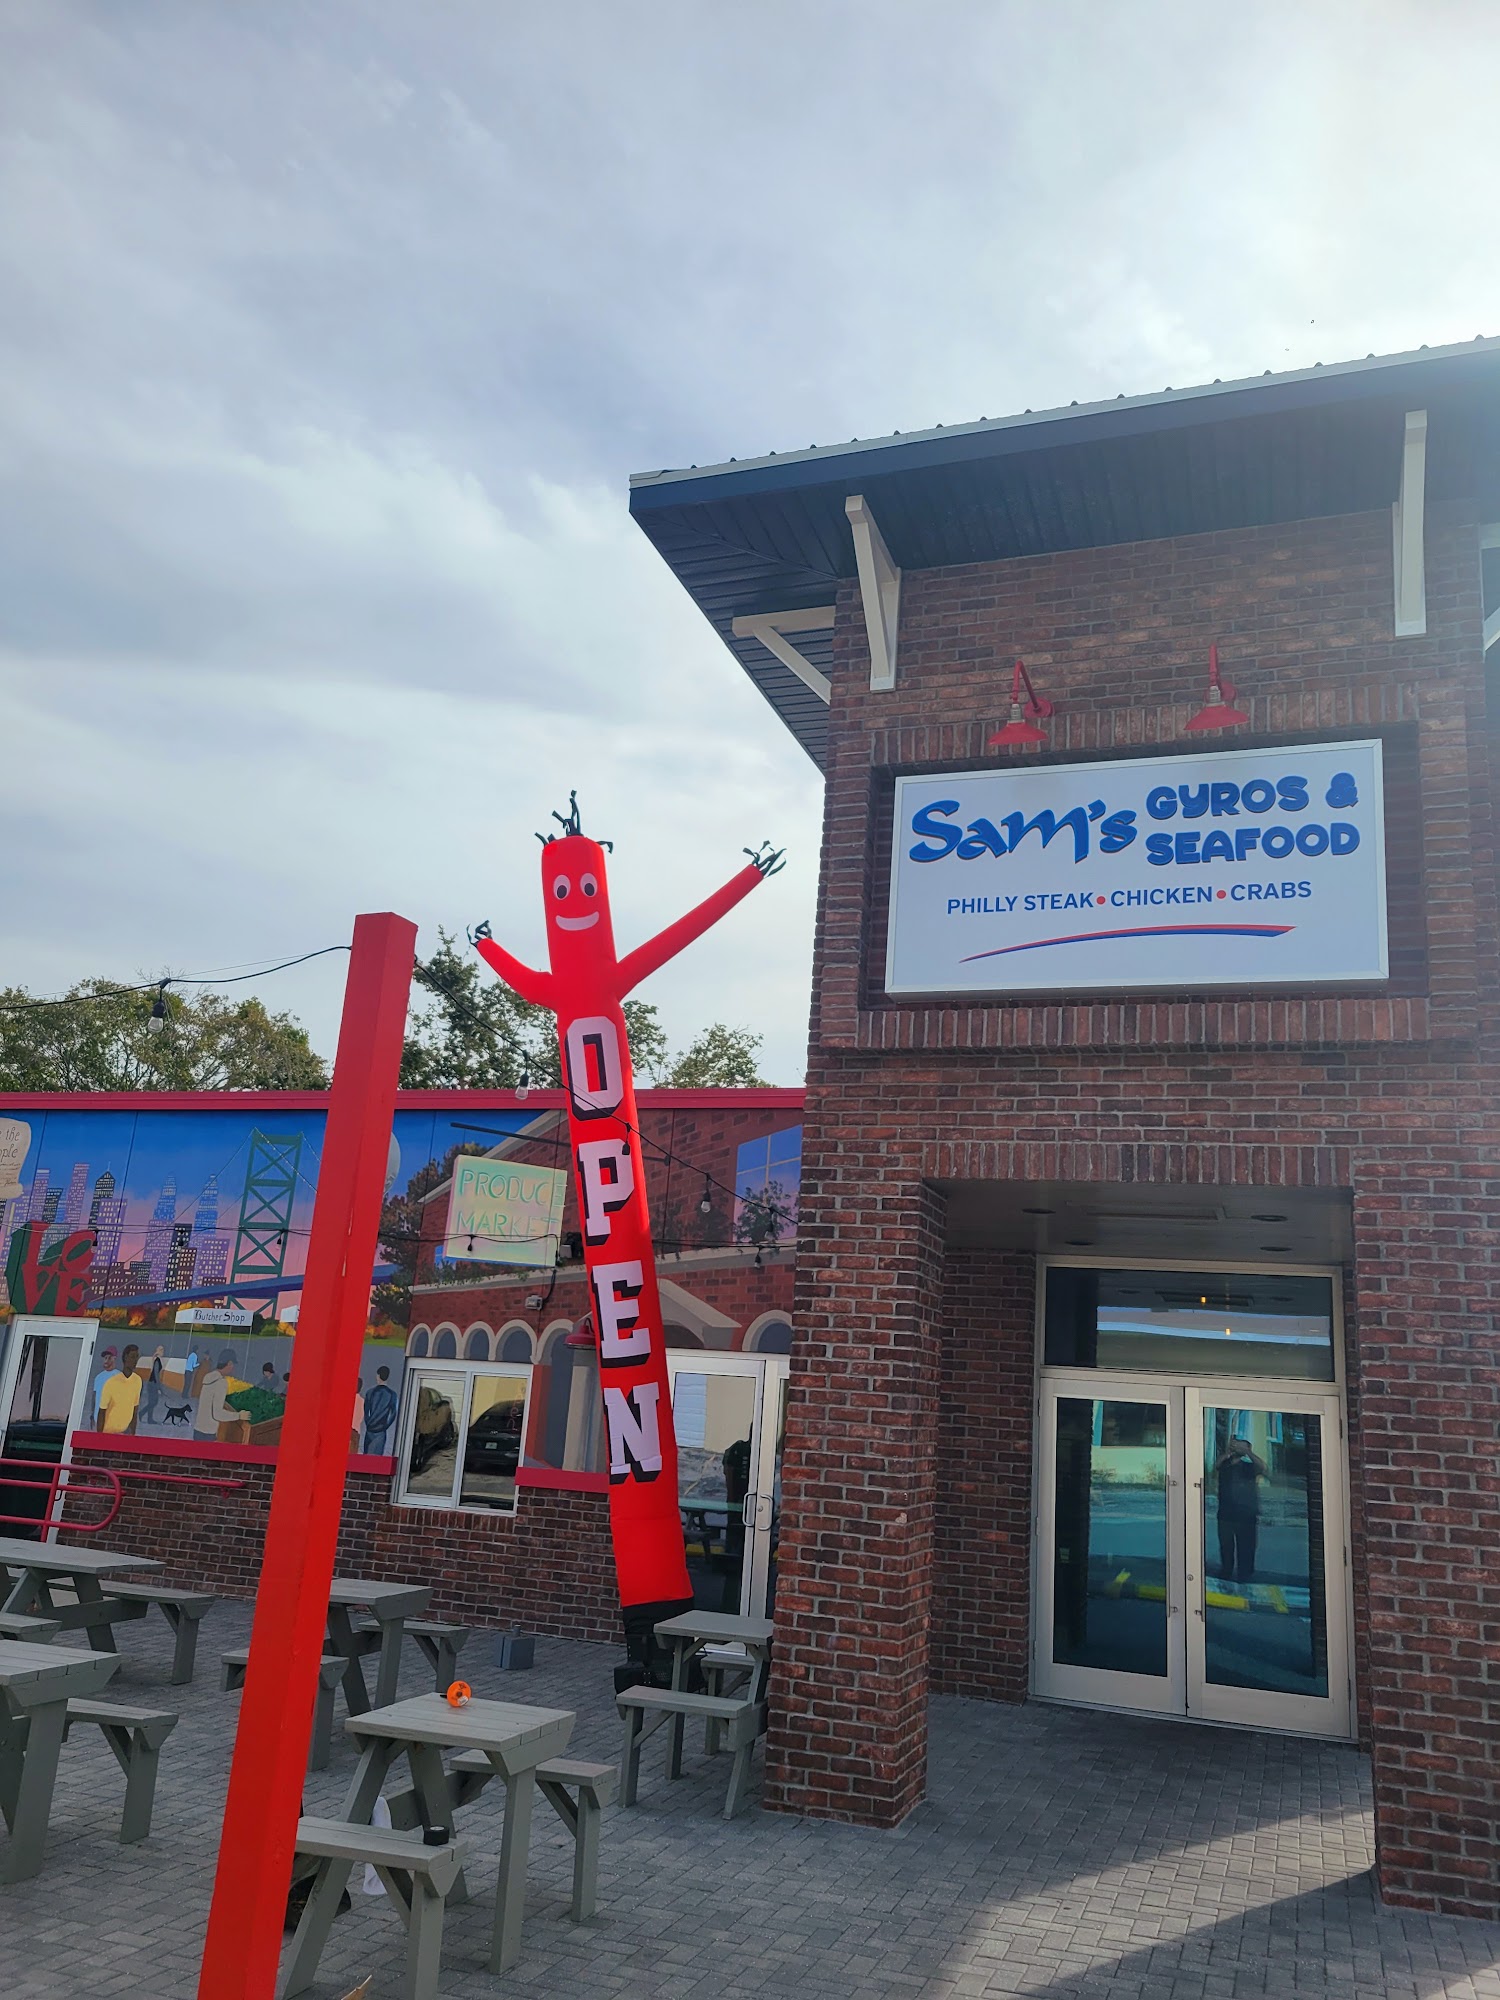 Sam's Gyros and Seafood 405 S Missouri Ave, Clearwater, FL 33756